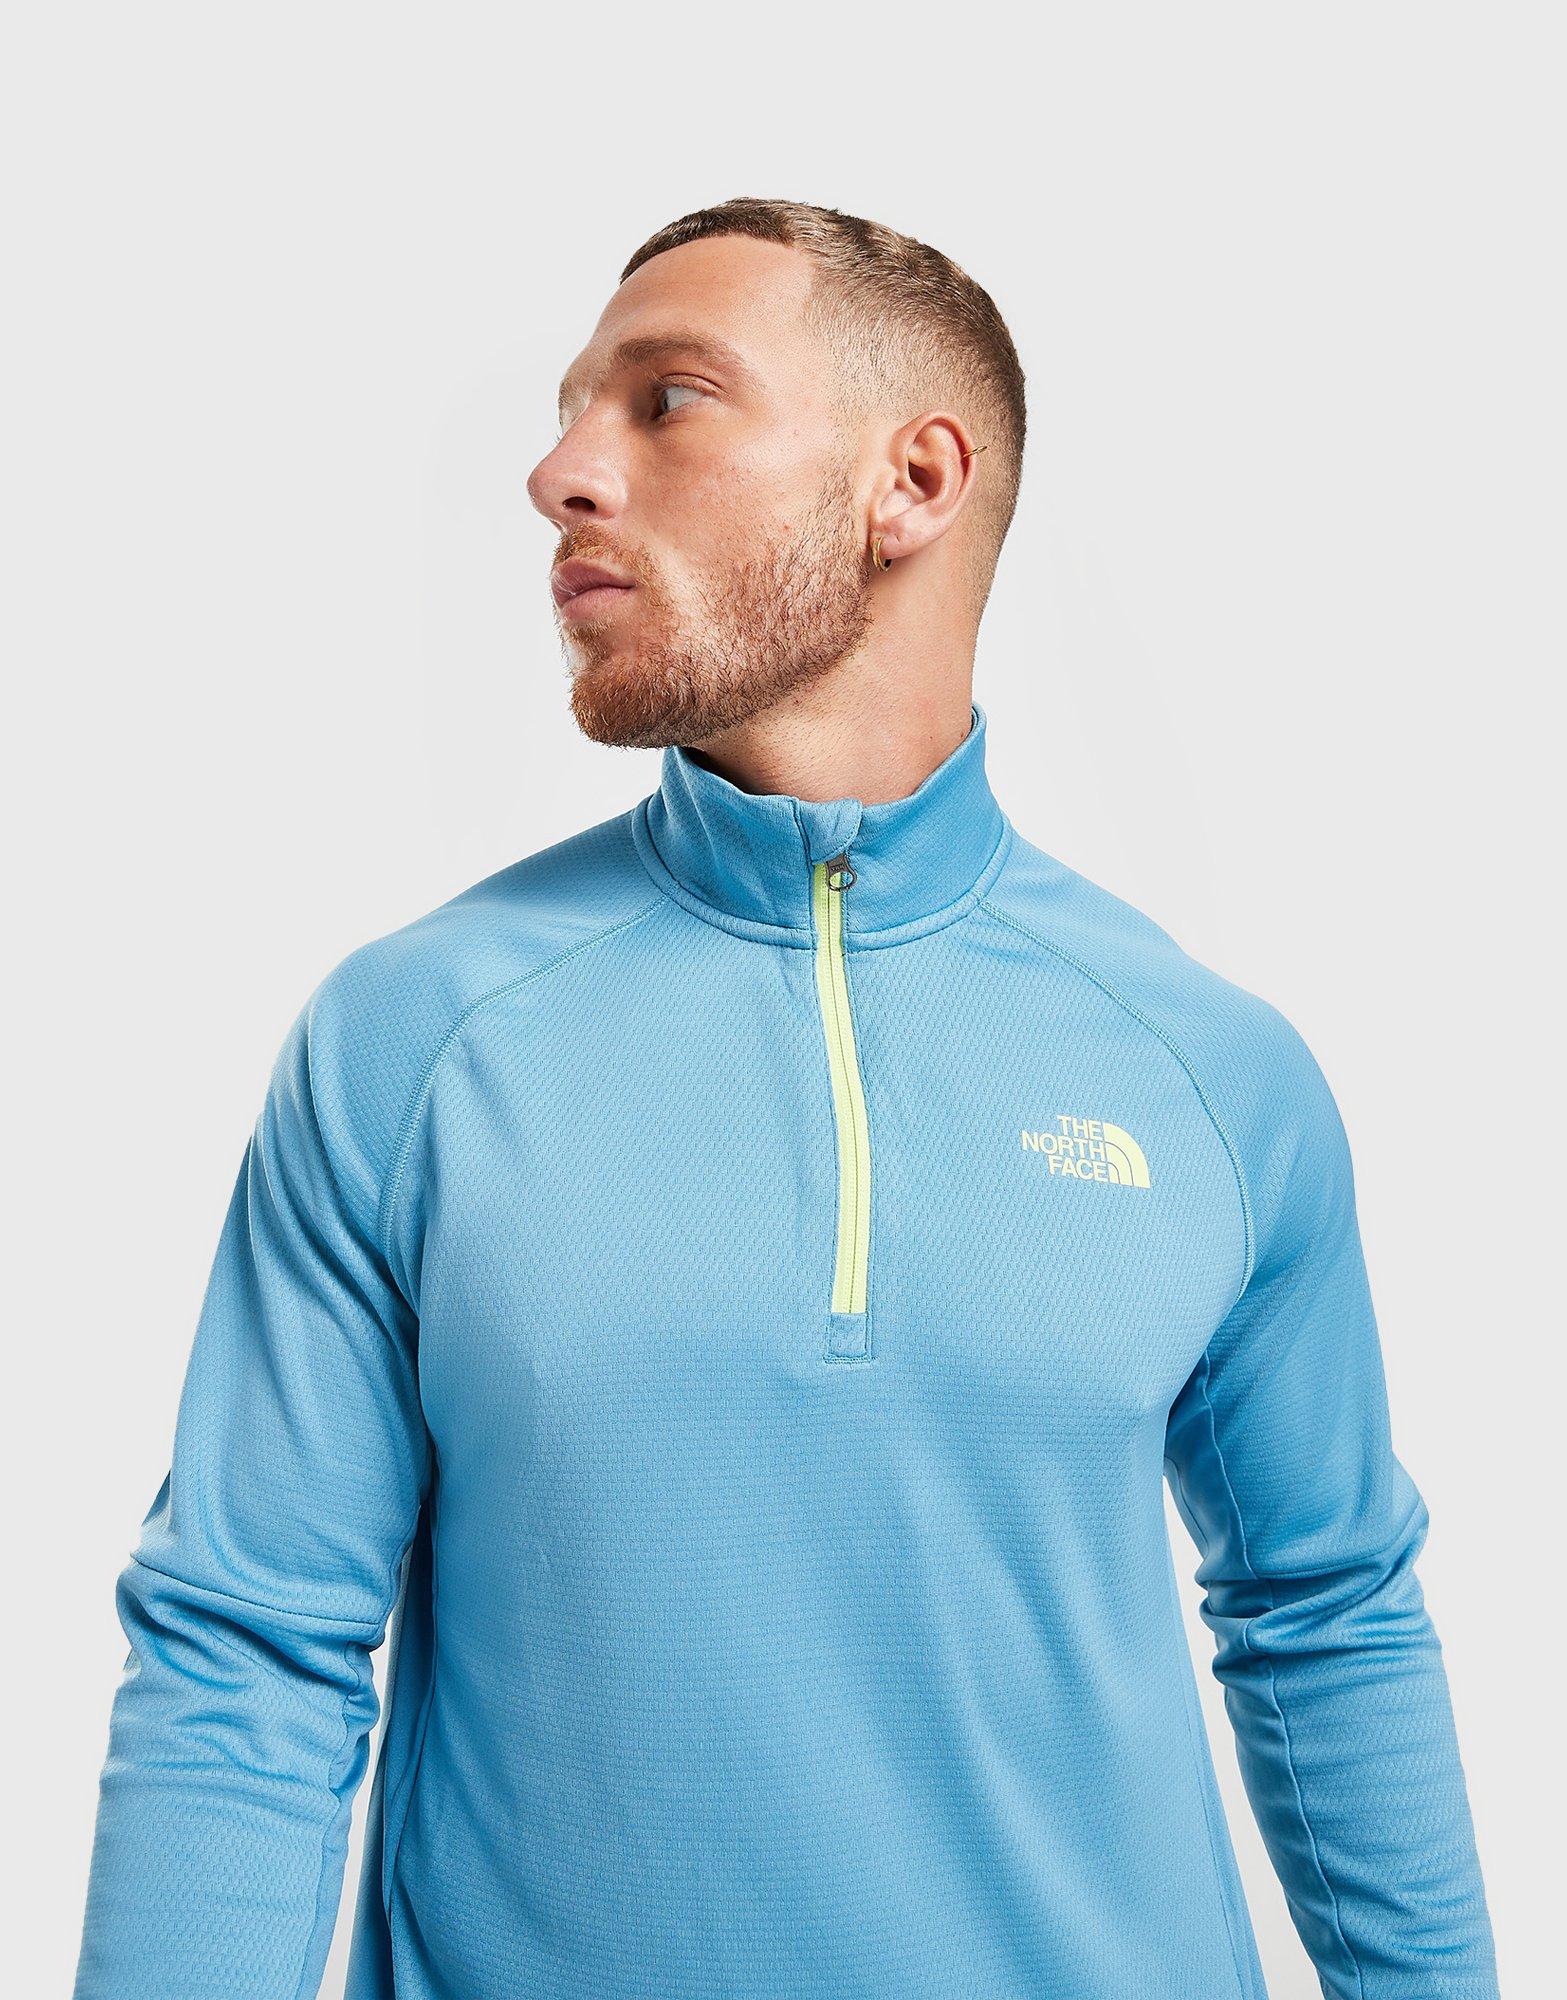 The North Face Performance Tech 1/4 Zip Track Top